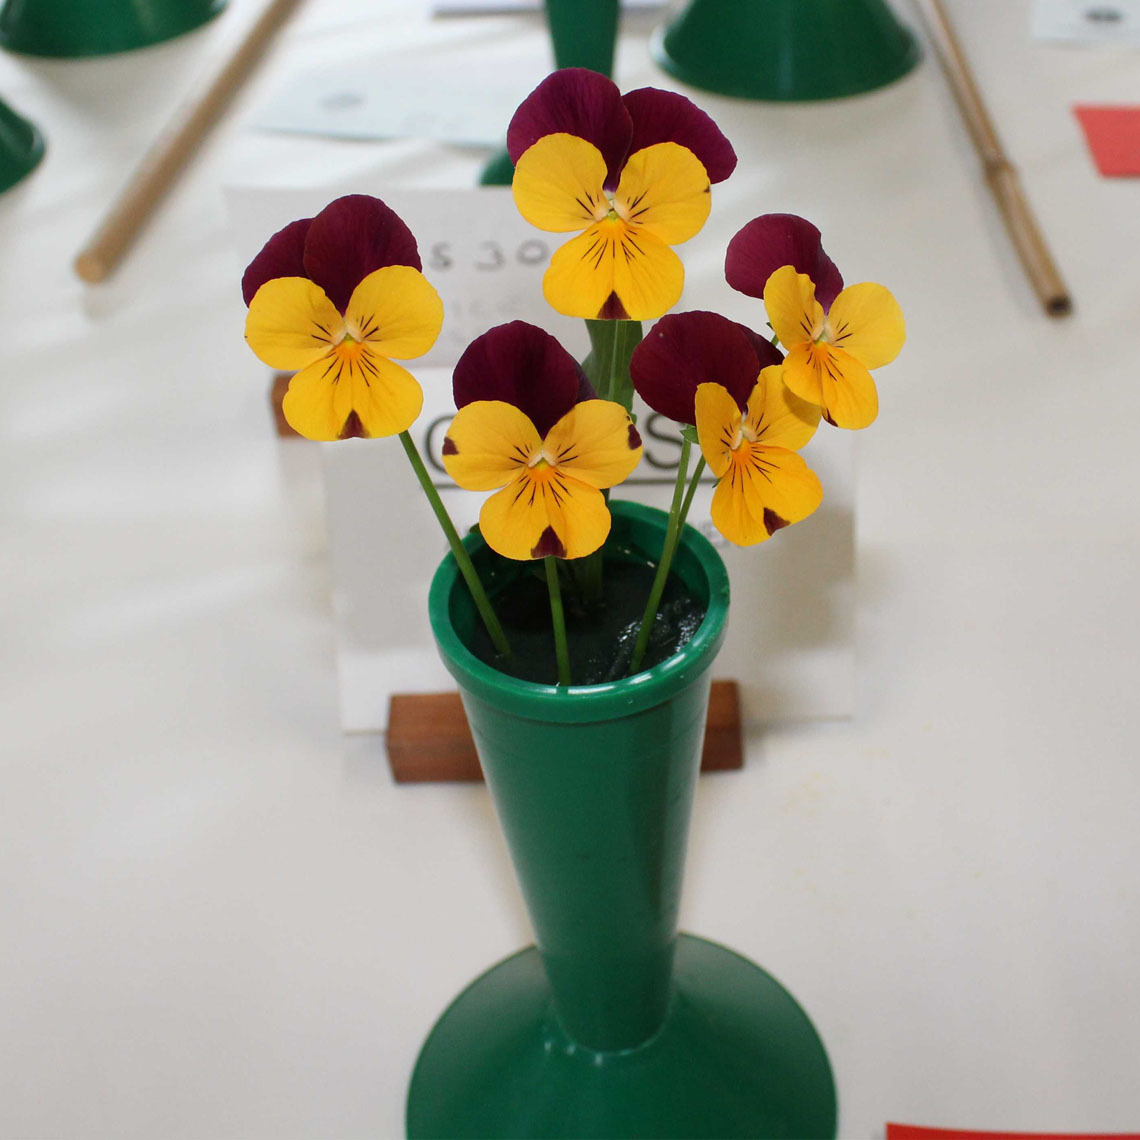 Class 2 - Any Other Flower (not Polyanthus or Primroses